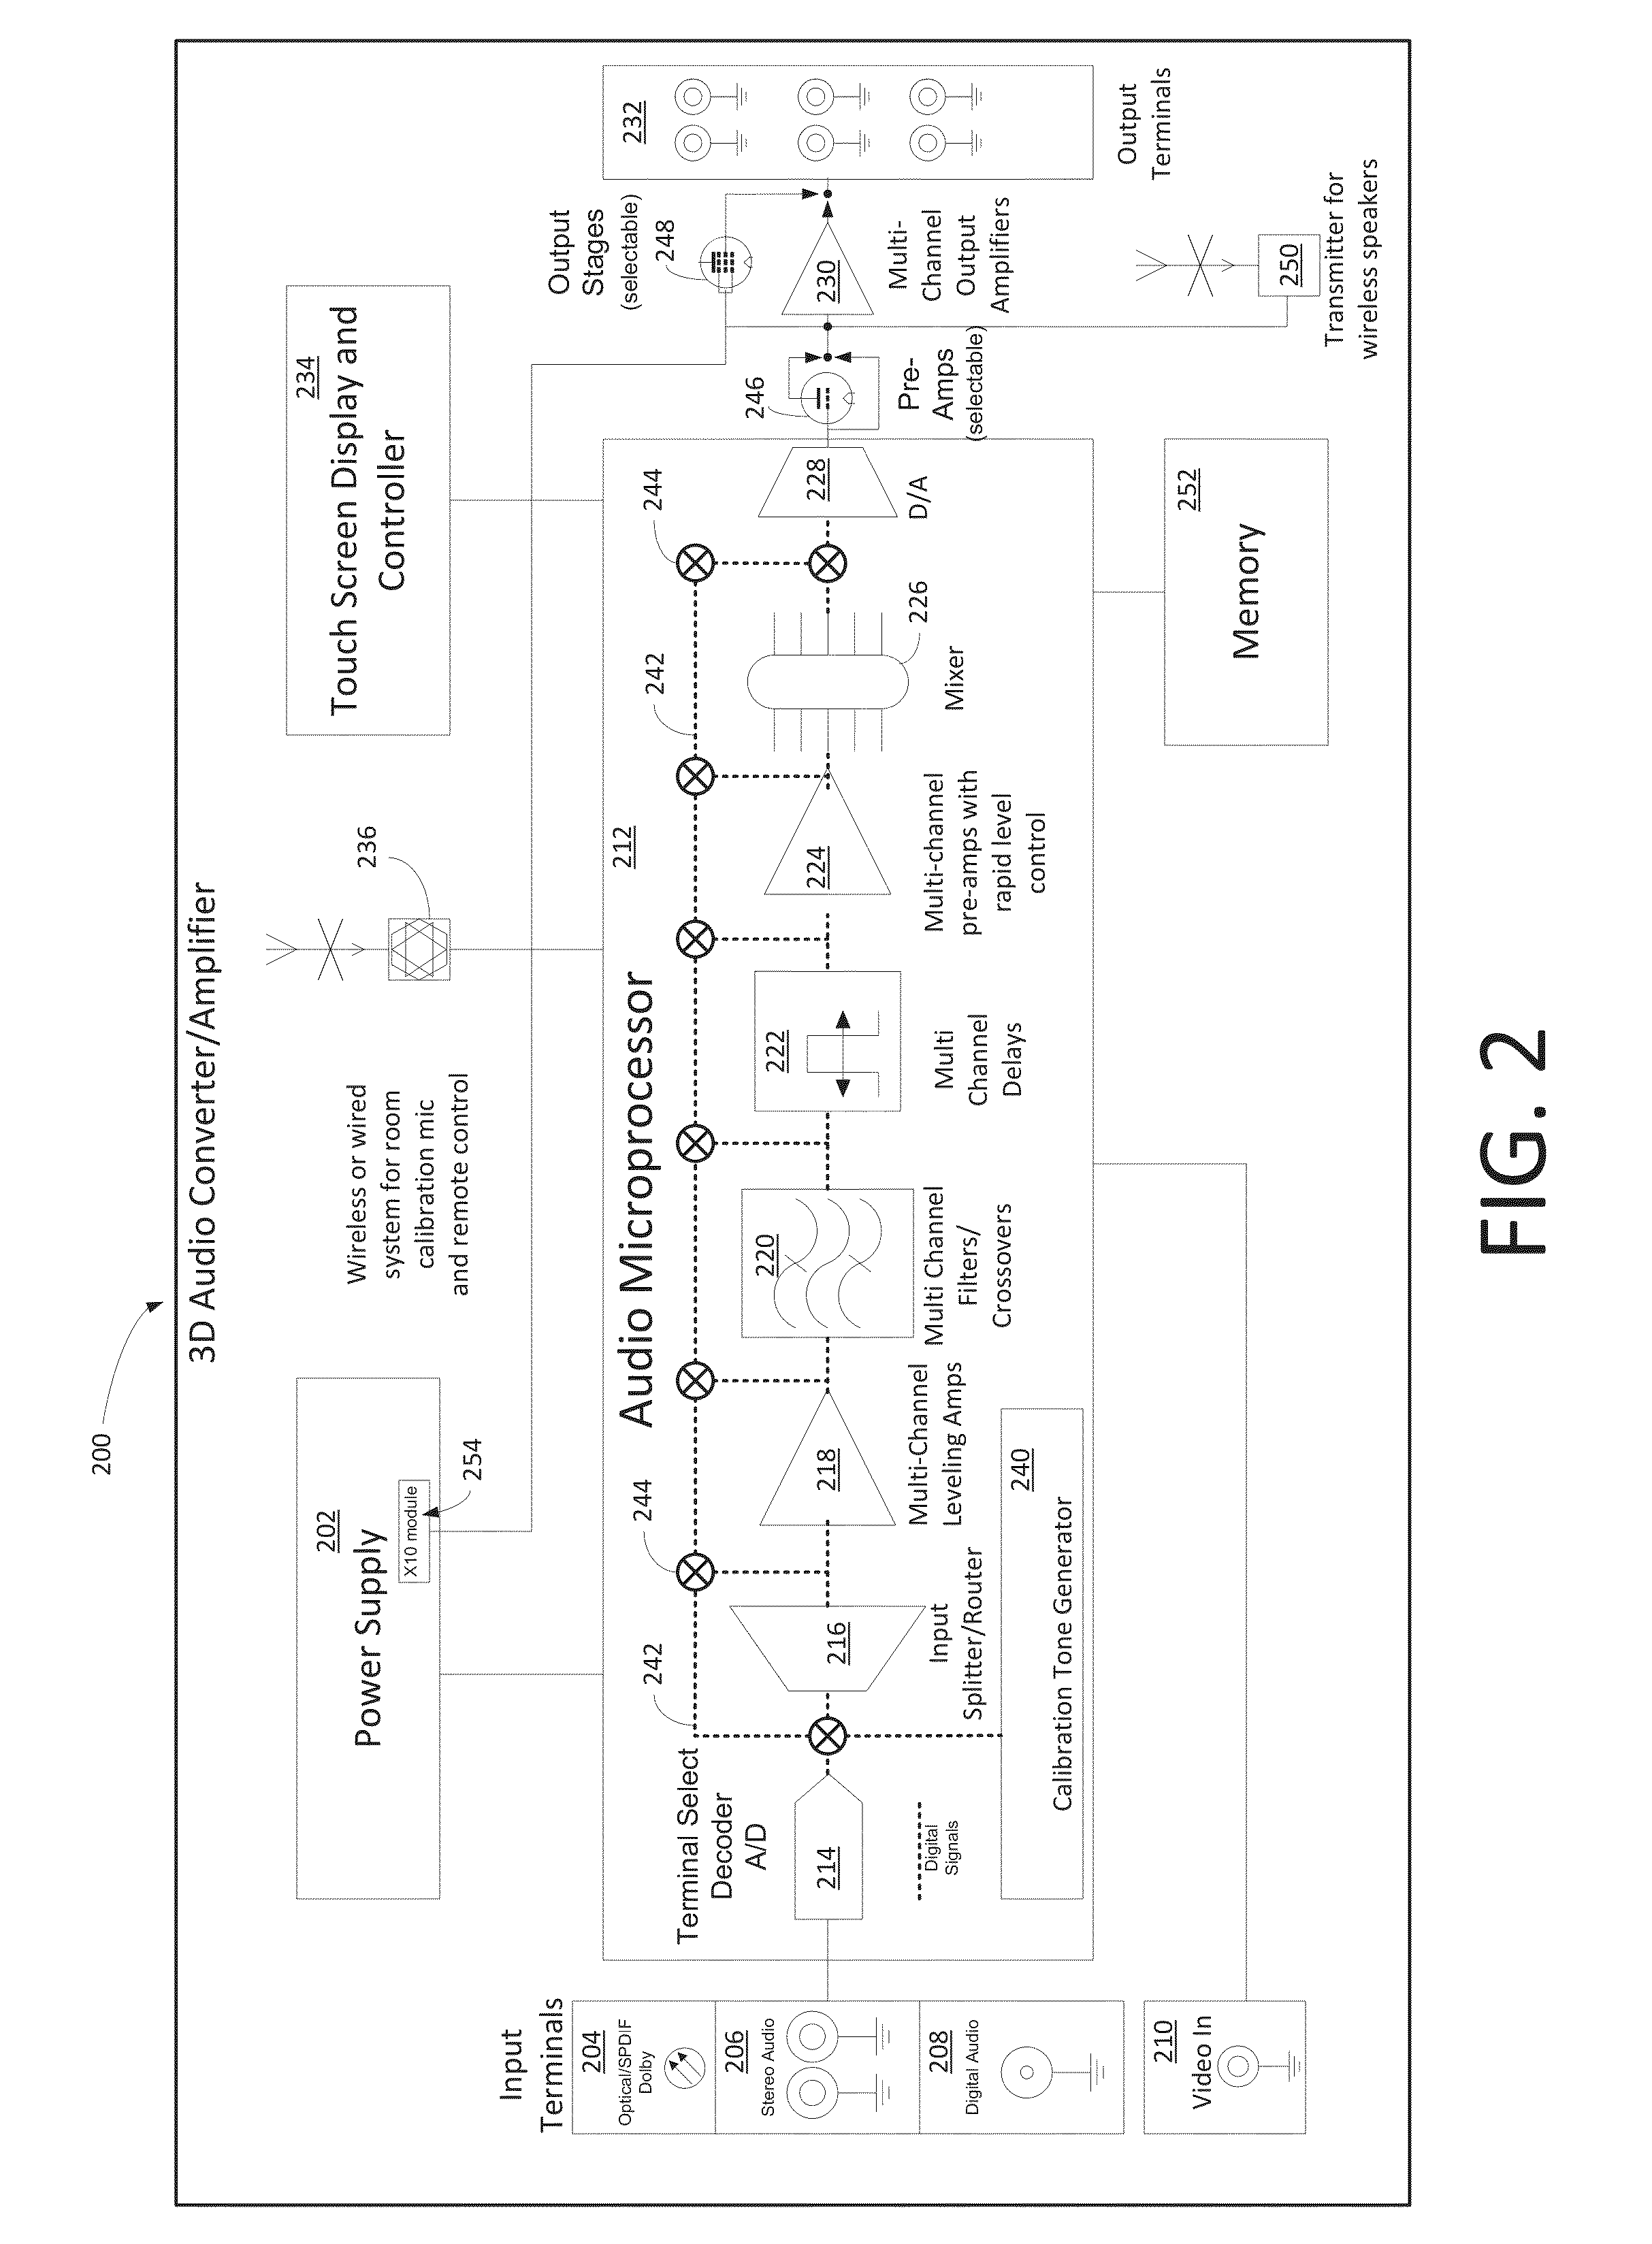 Systems, Methods, and Apparatus for Playback of Three-Dimensional Audio